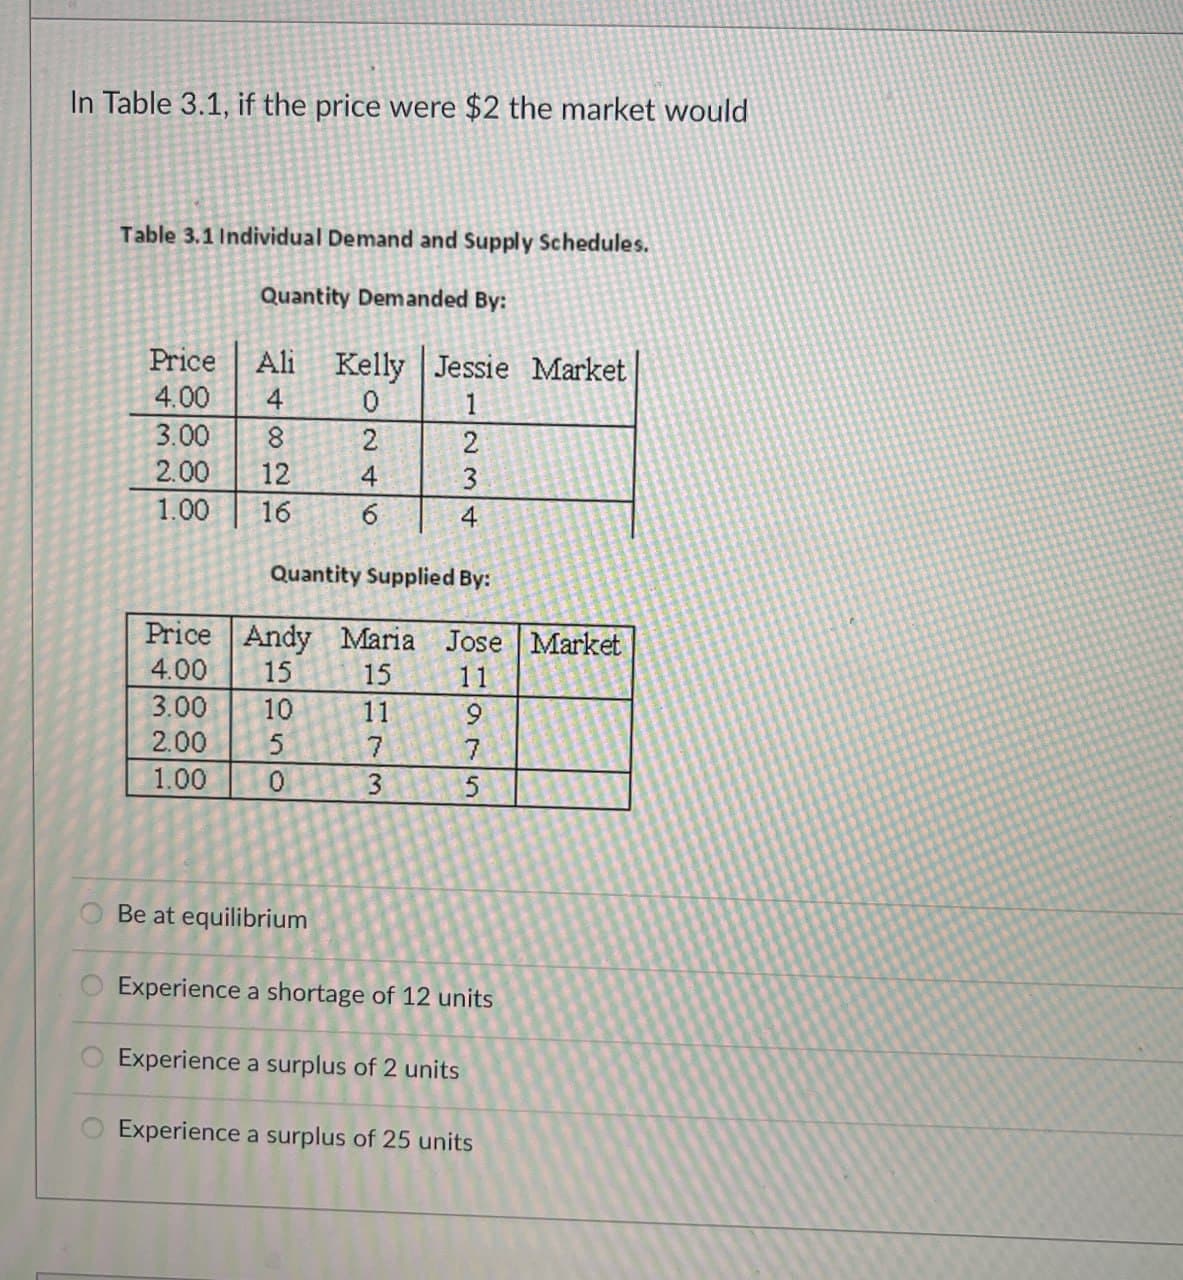 In Table 3.1, if the price were $2 the market would
Table 3.1 Individual Demand and Supply Schedules.
Quantity Demanded By:
Price
4.00
3.00
2.00
1826
Ali
Kelly Jessie Market
4
0
1
2
4
23
6
4
1.00
Quantity Supplied By:
Price Andy Maria Jose Market
4.00 15
3.00 10
50
15
11
11
9
2.00
7
1.00
0
75
5
Be at equilibrium
Experience a shortage of 12 units
Experience a surplus of 2 units
Experience a surplus of 25 units